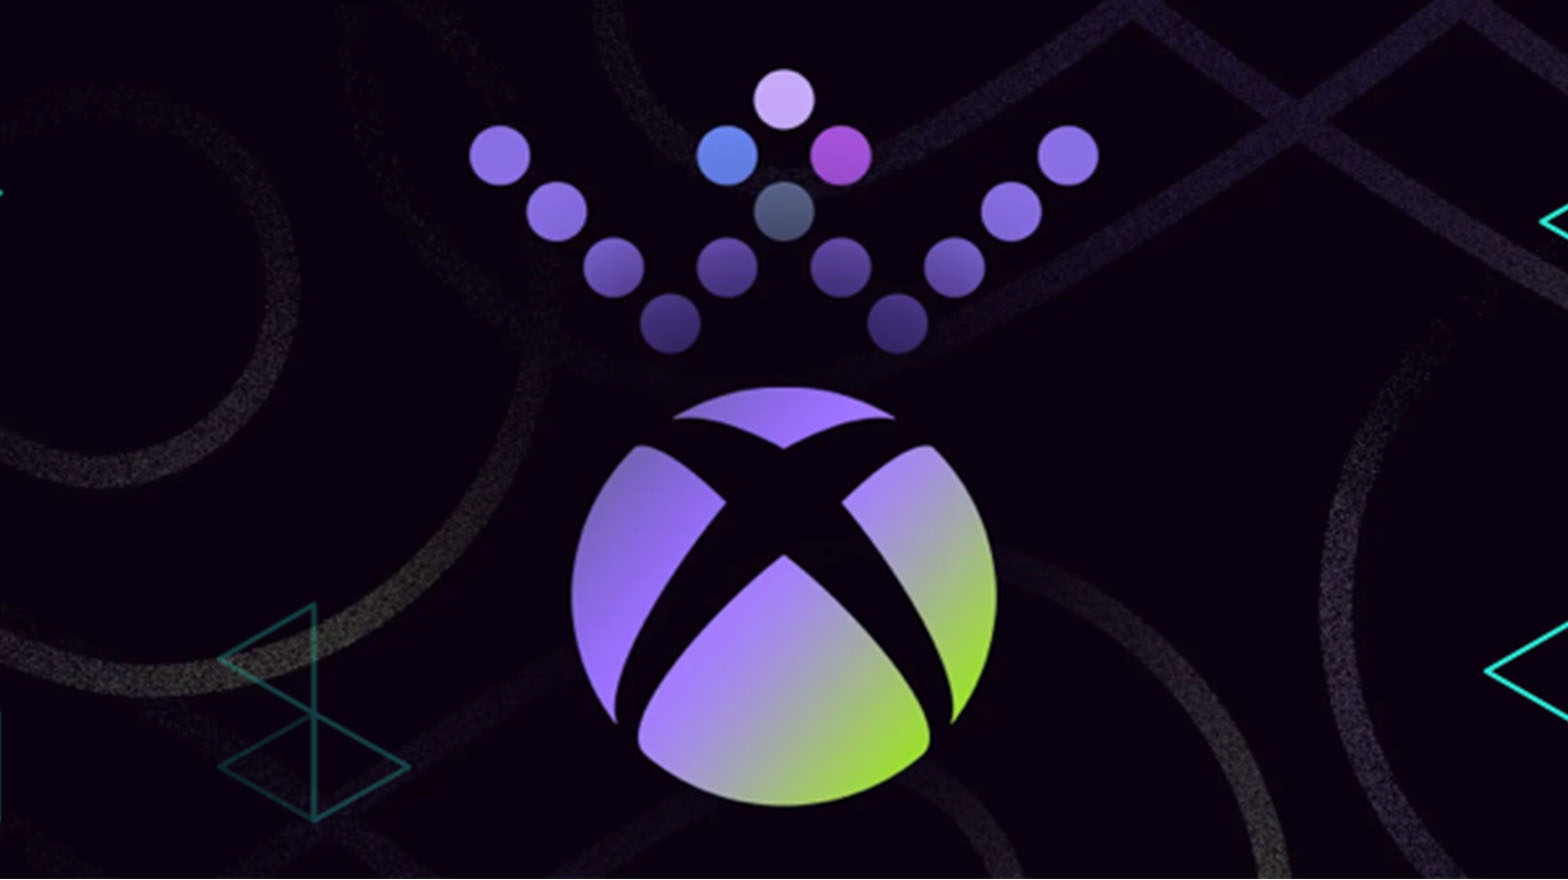 Xbox logo with a W made of dots above it